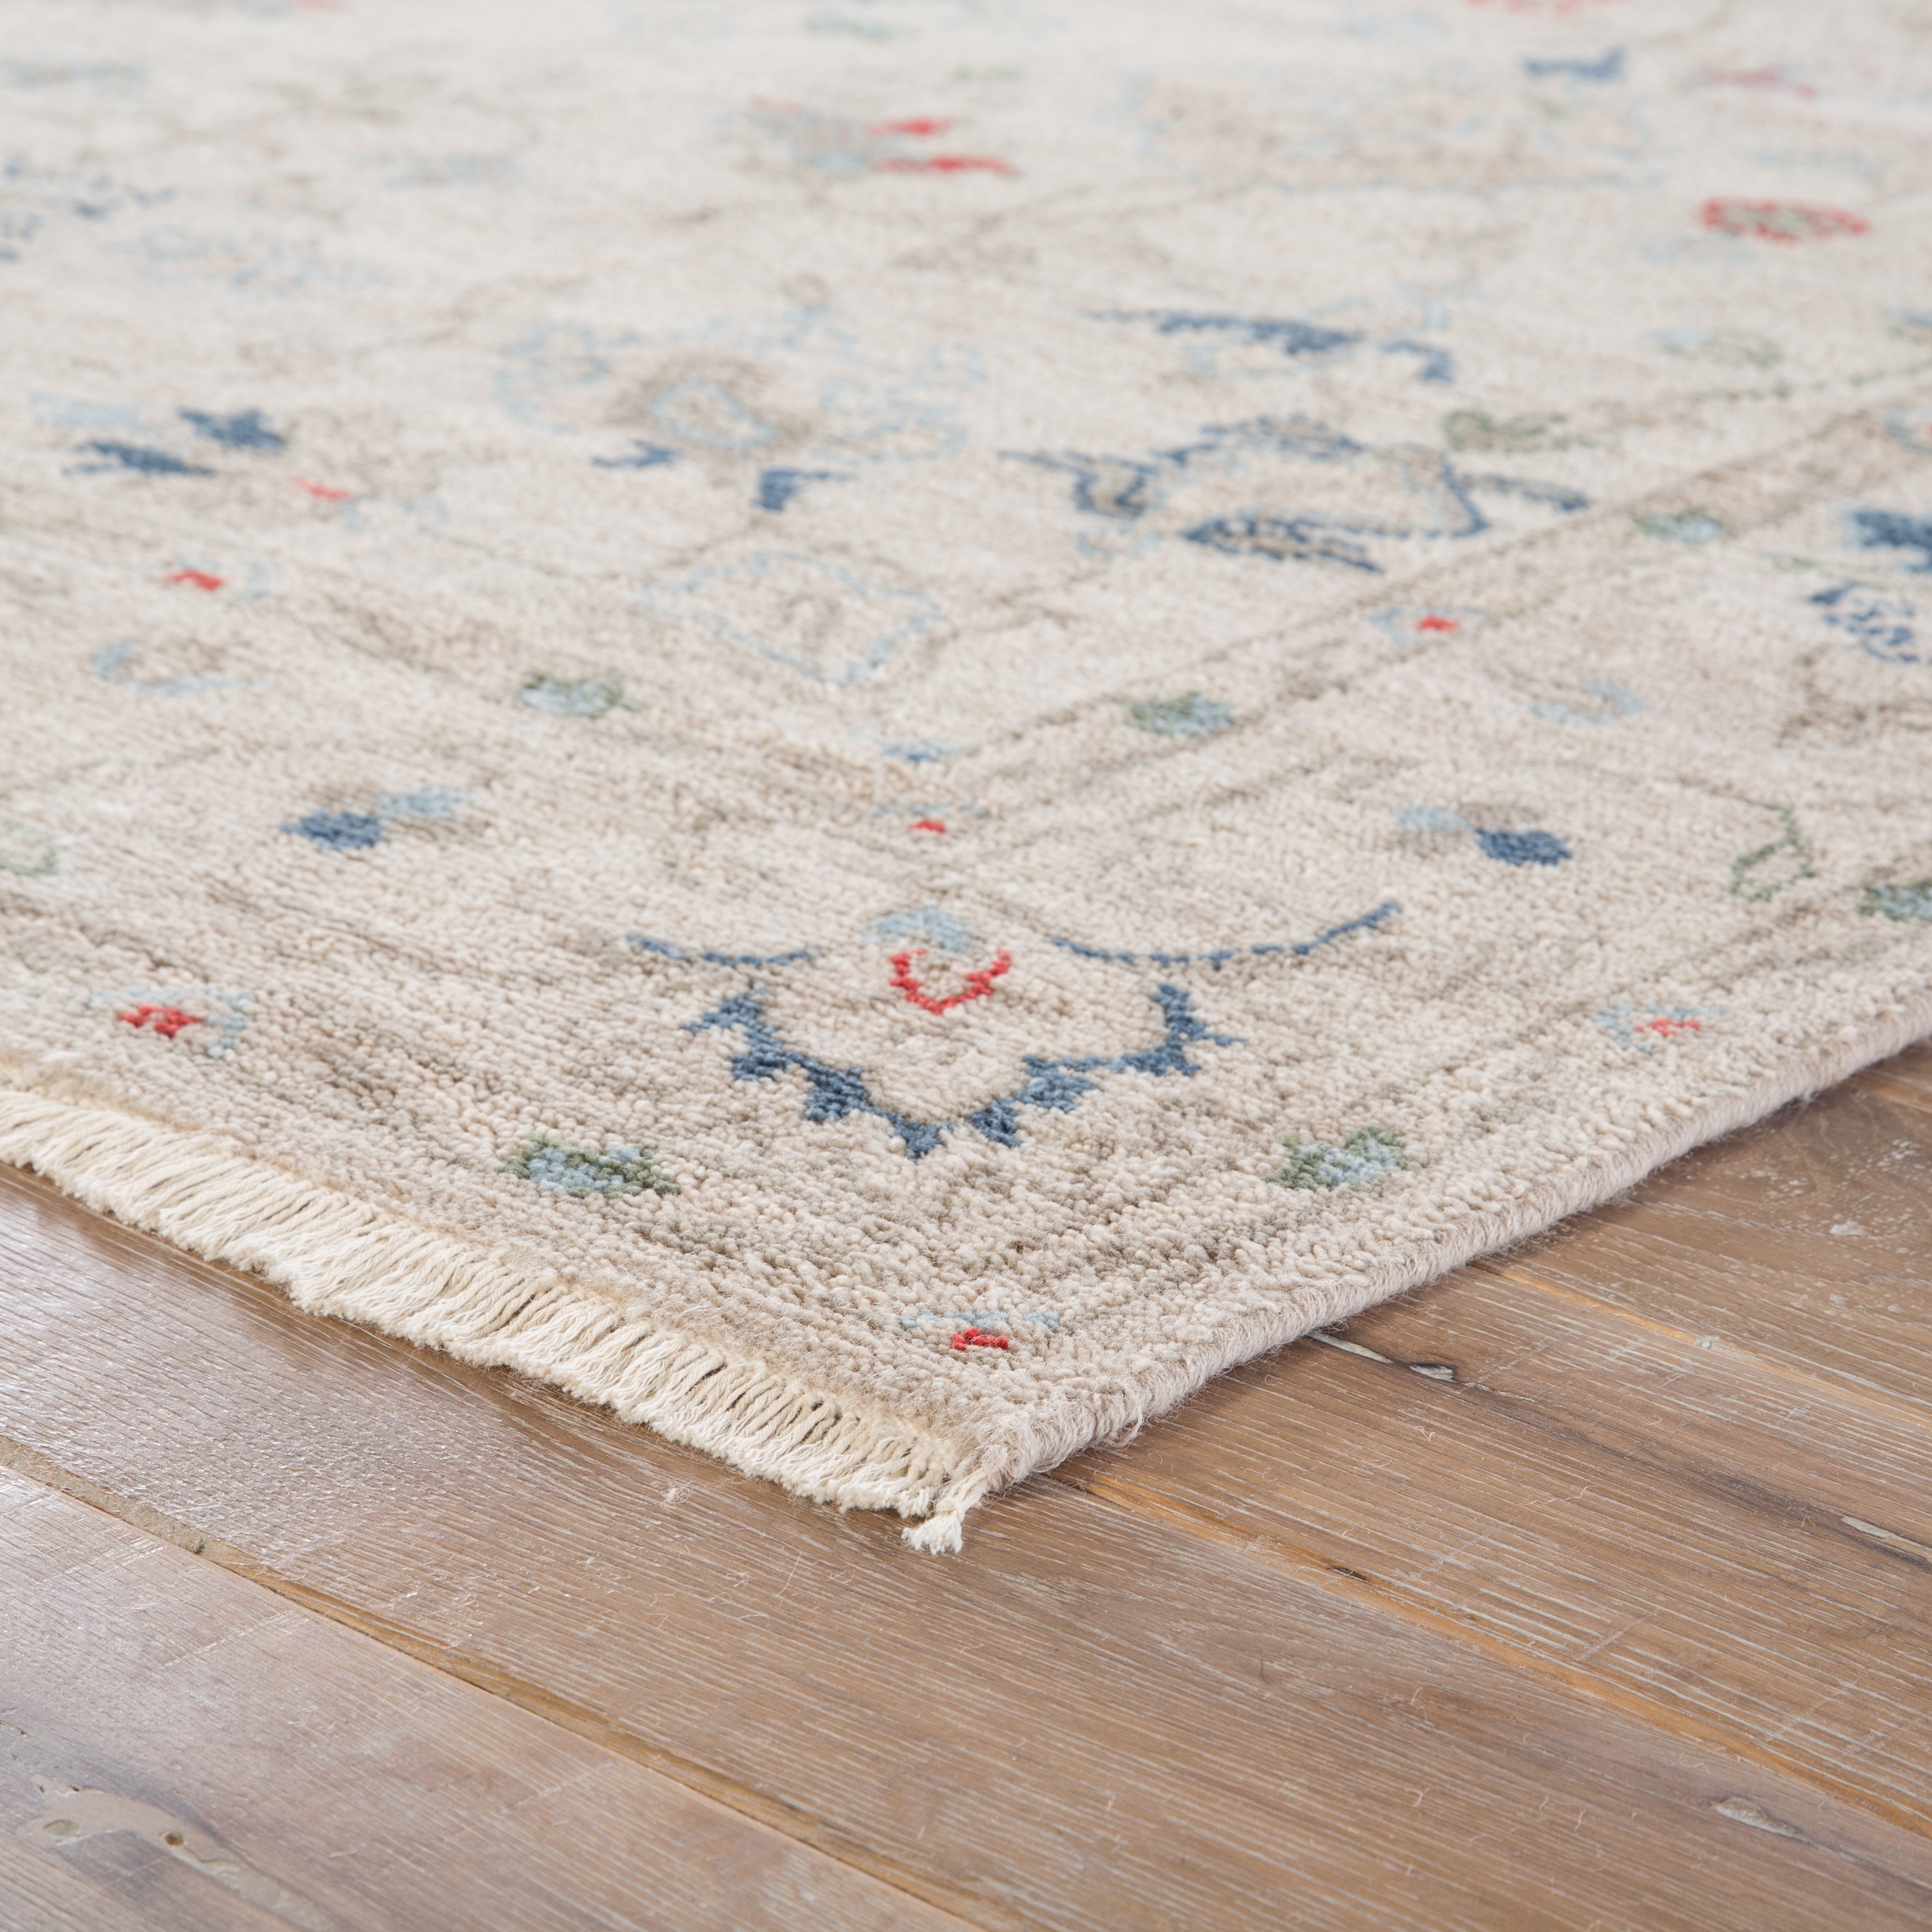 Hacci Hand-Knotted Floral Cream/ Blue Area Rug (8' X 10') - Image 1